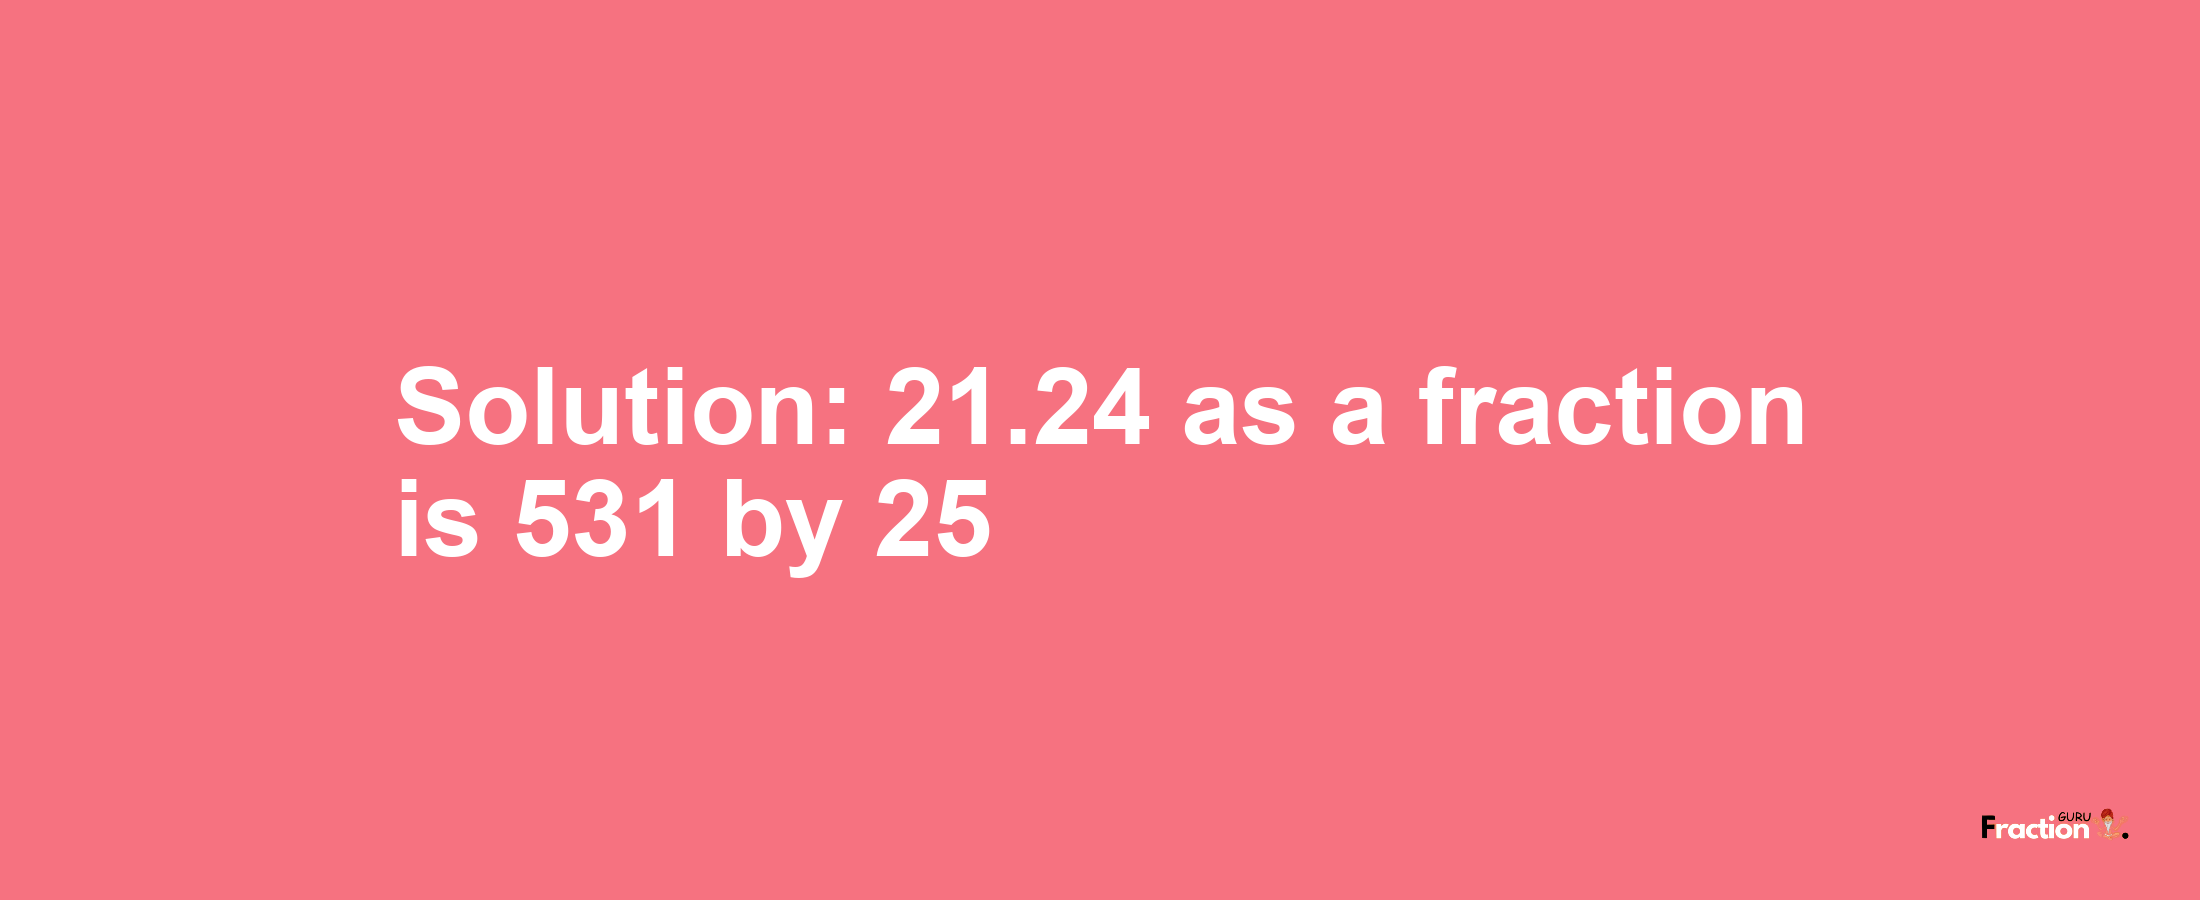 Solution:21.24 as a fraction is 531/25